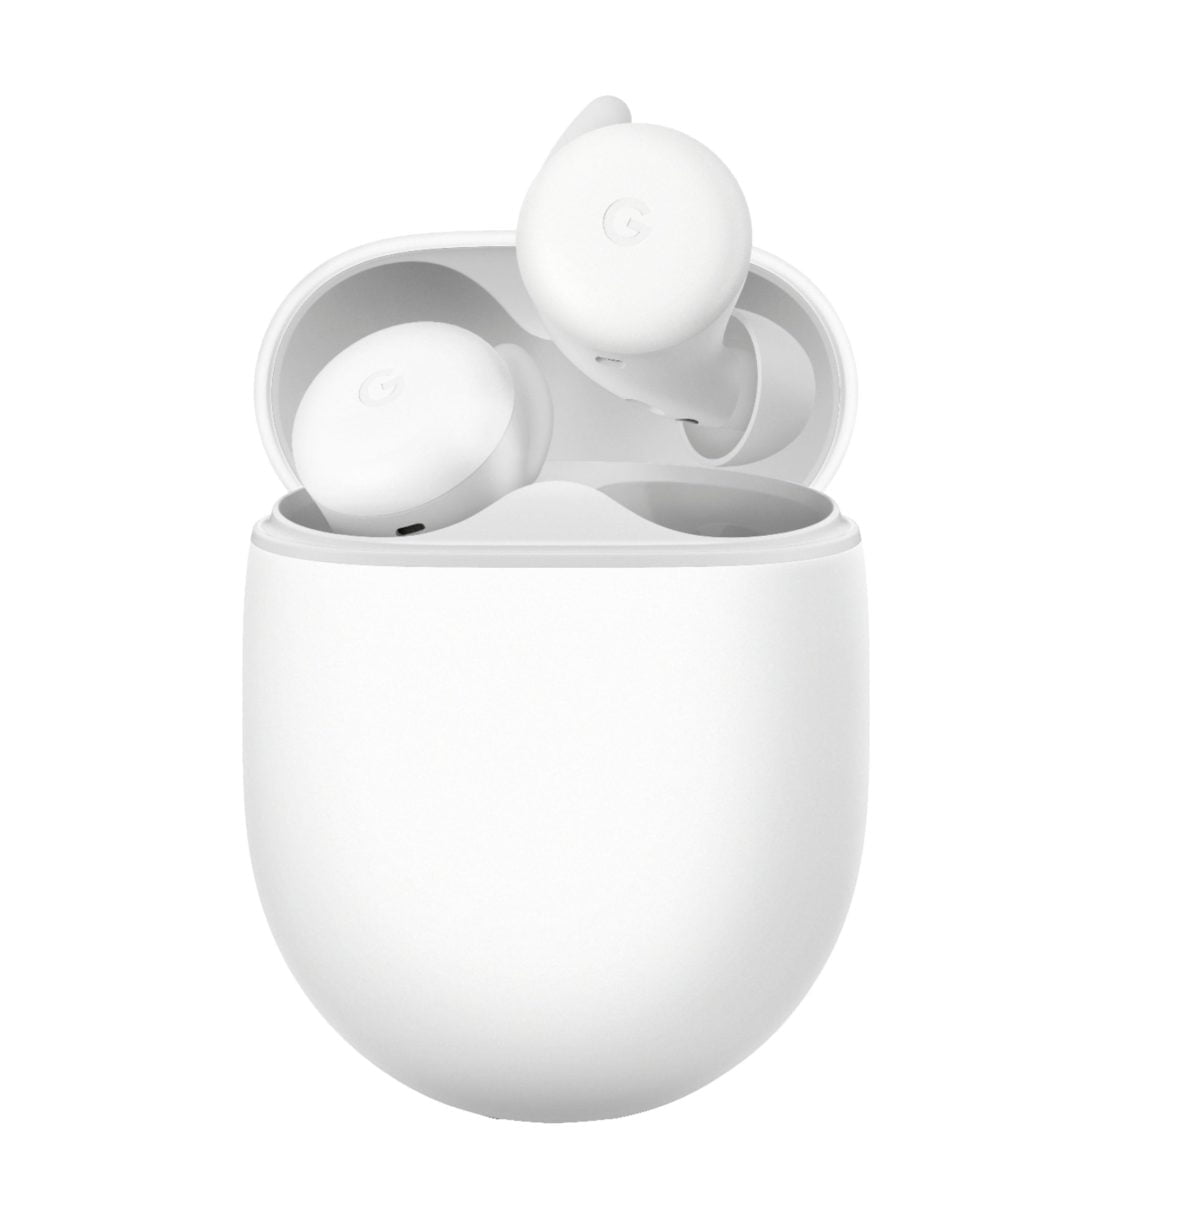 6461033 Sd Scaled Google &Lt;H1&Gt;Google - Pixel Buds A-Series True Wireless In-Ear Headphones - Clearly White&Lt;/H1&Gt; &Lt;Div Class=&Quot;Long-Description-Container Body-Copy &Quot;&Gt; &Lt;Div Class=&Quot;Html-Fragment&Quot;&Gt; &Lt;Div&Gt; &Lt;Div&Gt;Pixel Buds A-Series Bring You Rich, High-Quality Sound For A Lot Less Than You’d Expect. Their Beamforming Mics Help Make Calls Crystal Clear. The Flush-To-Ear Design Is Stylish, And The Stabilizer Arc Keeps Them In Place So You Can Wear Them Even During The Sweatiest Workout.&Lt;/Div&Gt; &Lt;Div&Gt;&Lt;/Div&Gt; &Lt;/Div&Gt; &Lt;/Div&Gt; &Lt;/Div&Gt; Pixel Buds Google - Pixel Buds A-Series True Wireless In-Ear Headphones - Clearly White